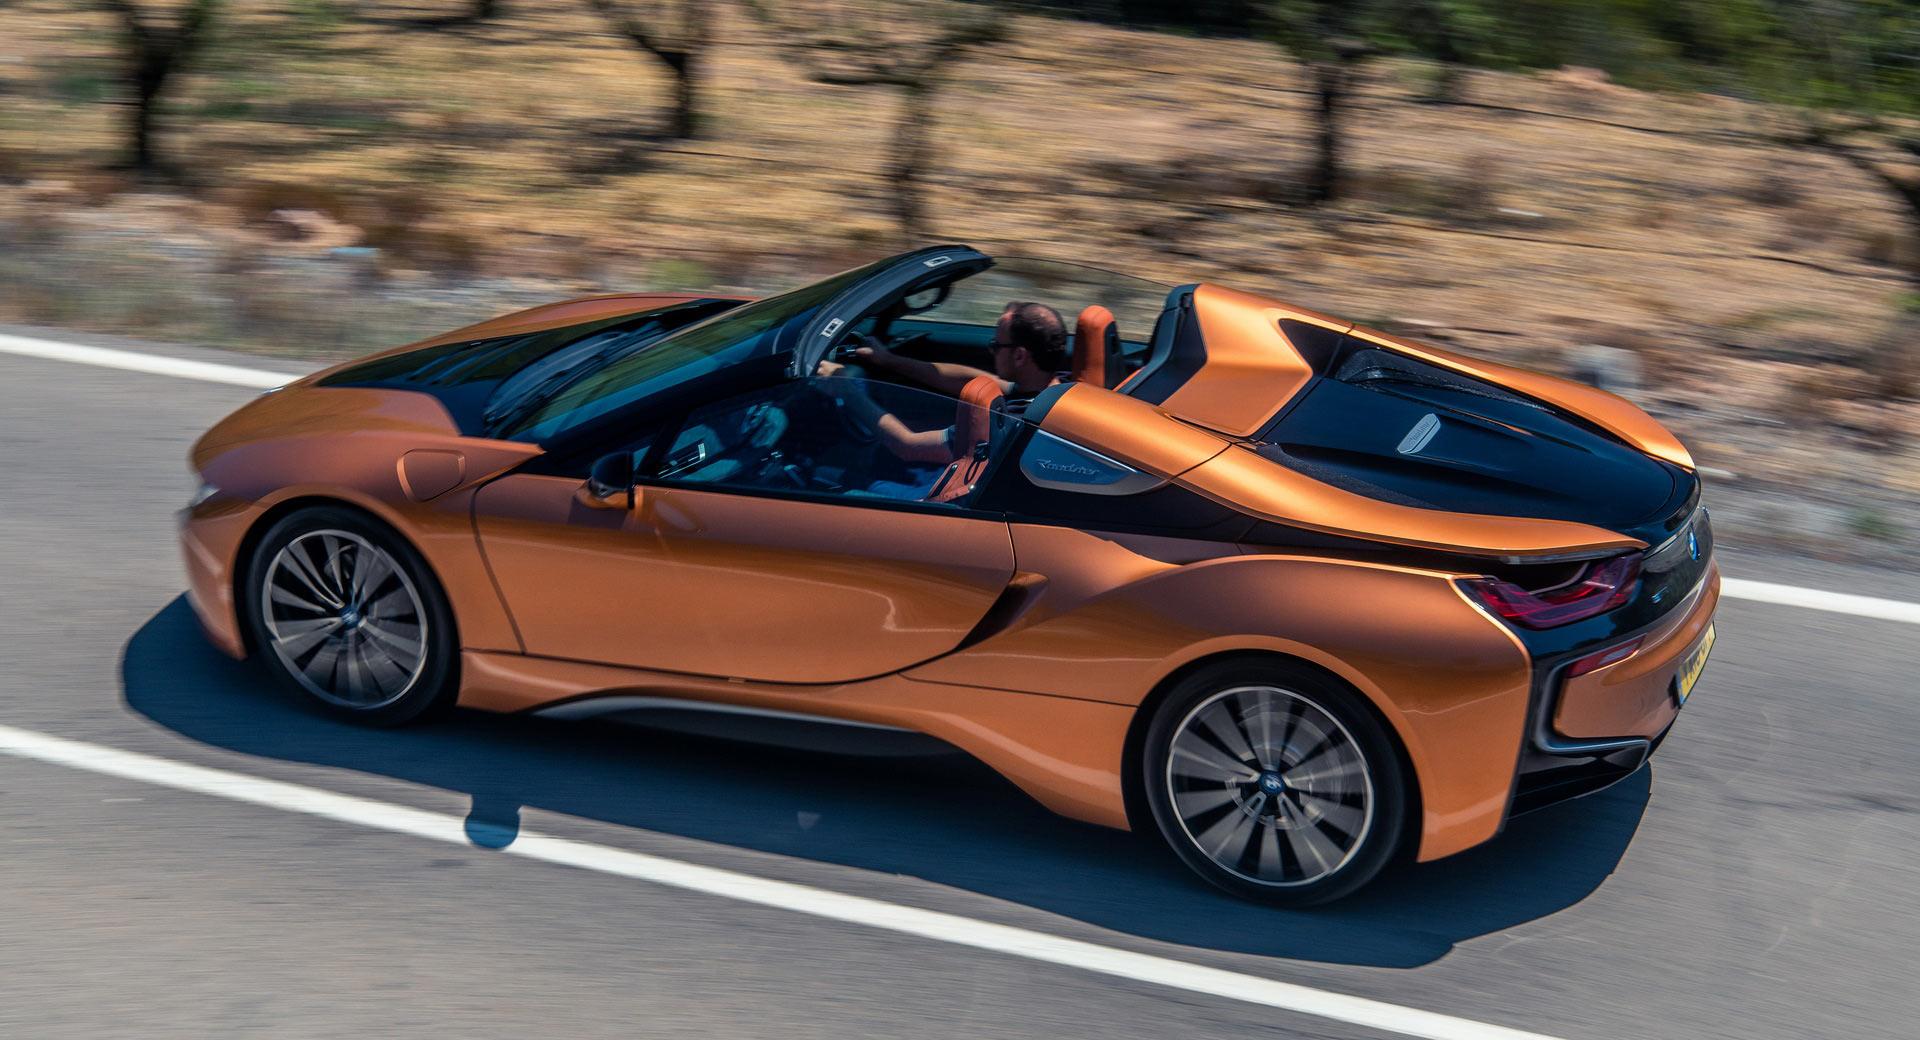 New BMW i8 Roadster Goes On Sale In The UK, Priced From